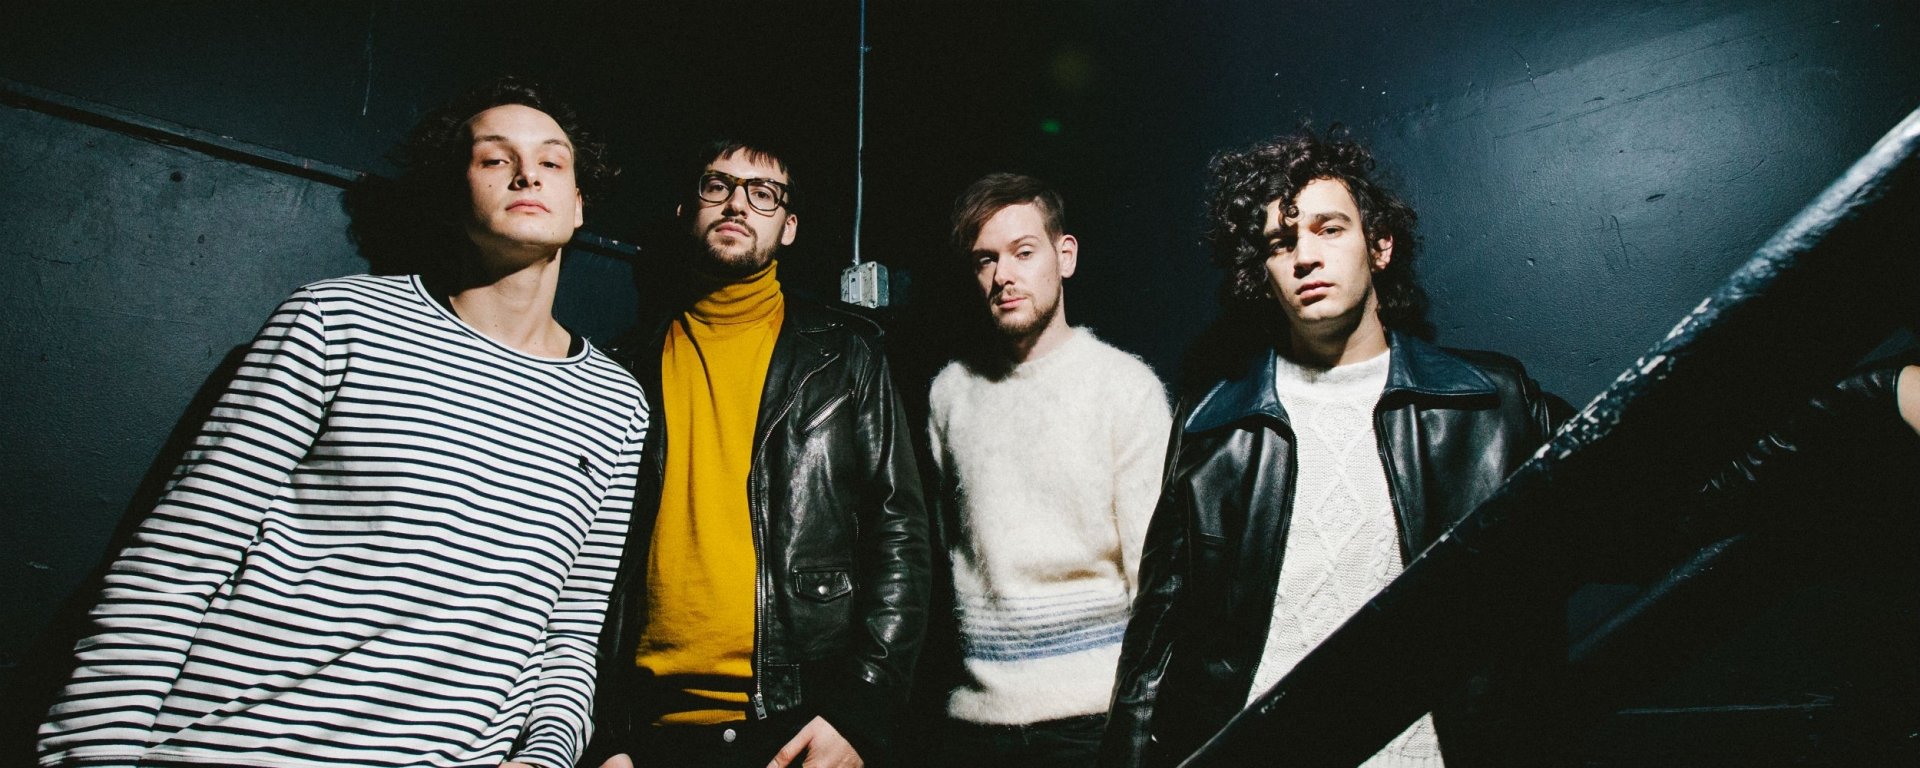 The 1975 - Desktop Wallpapers, Phone Wallpaper, PFP, Gifs, and More!